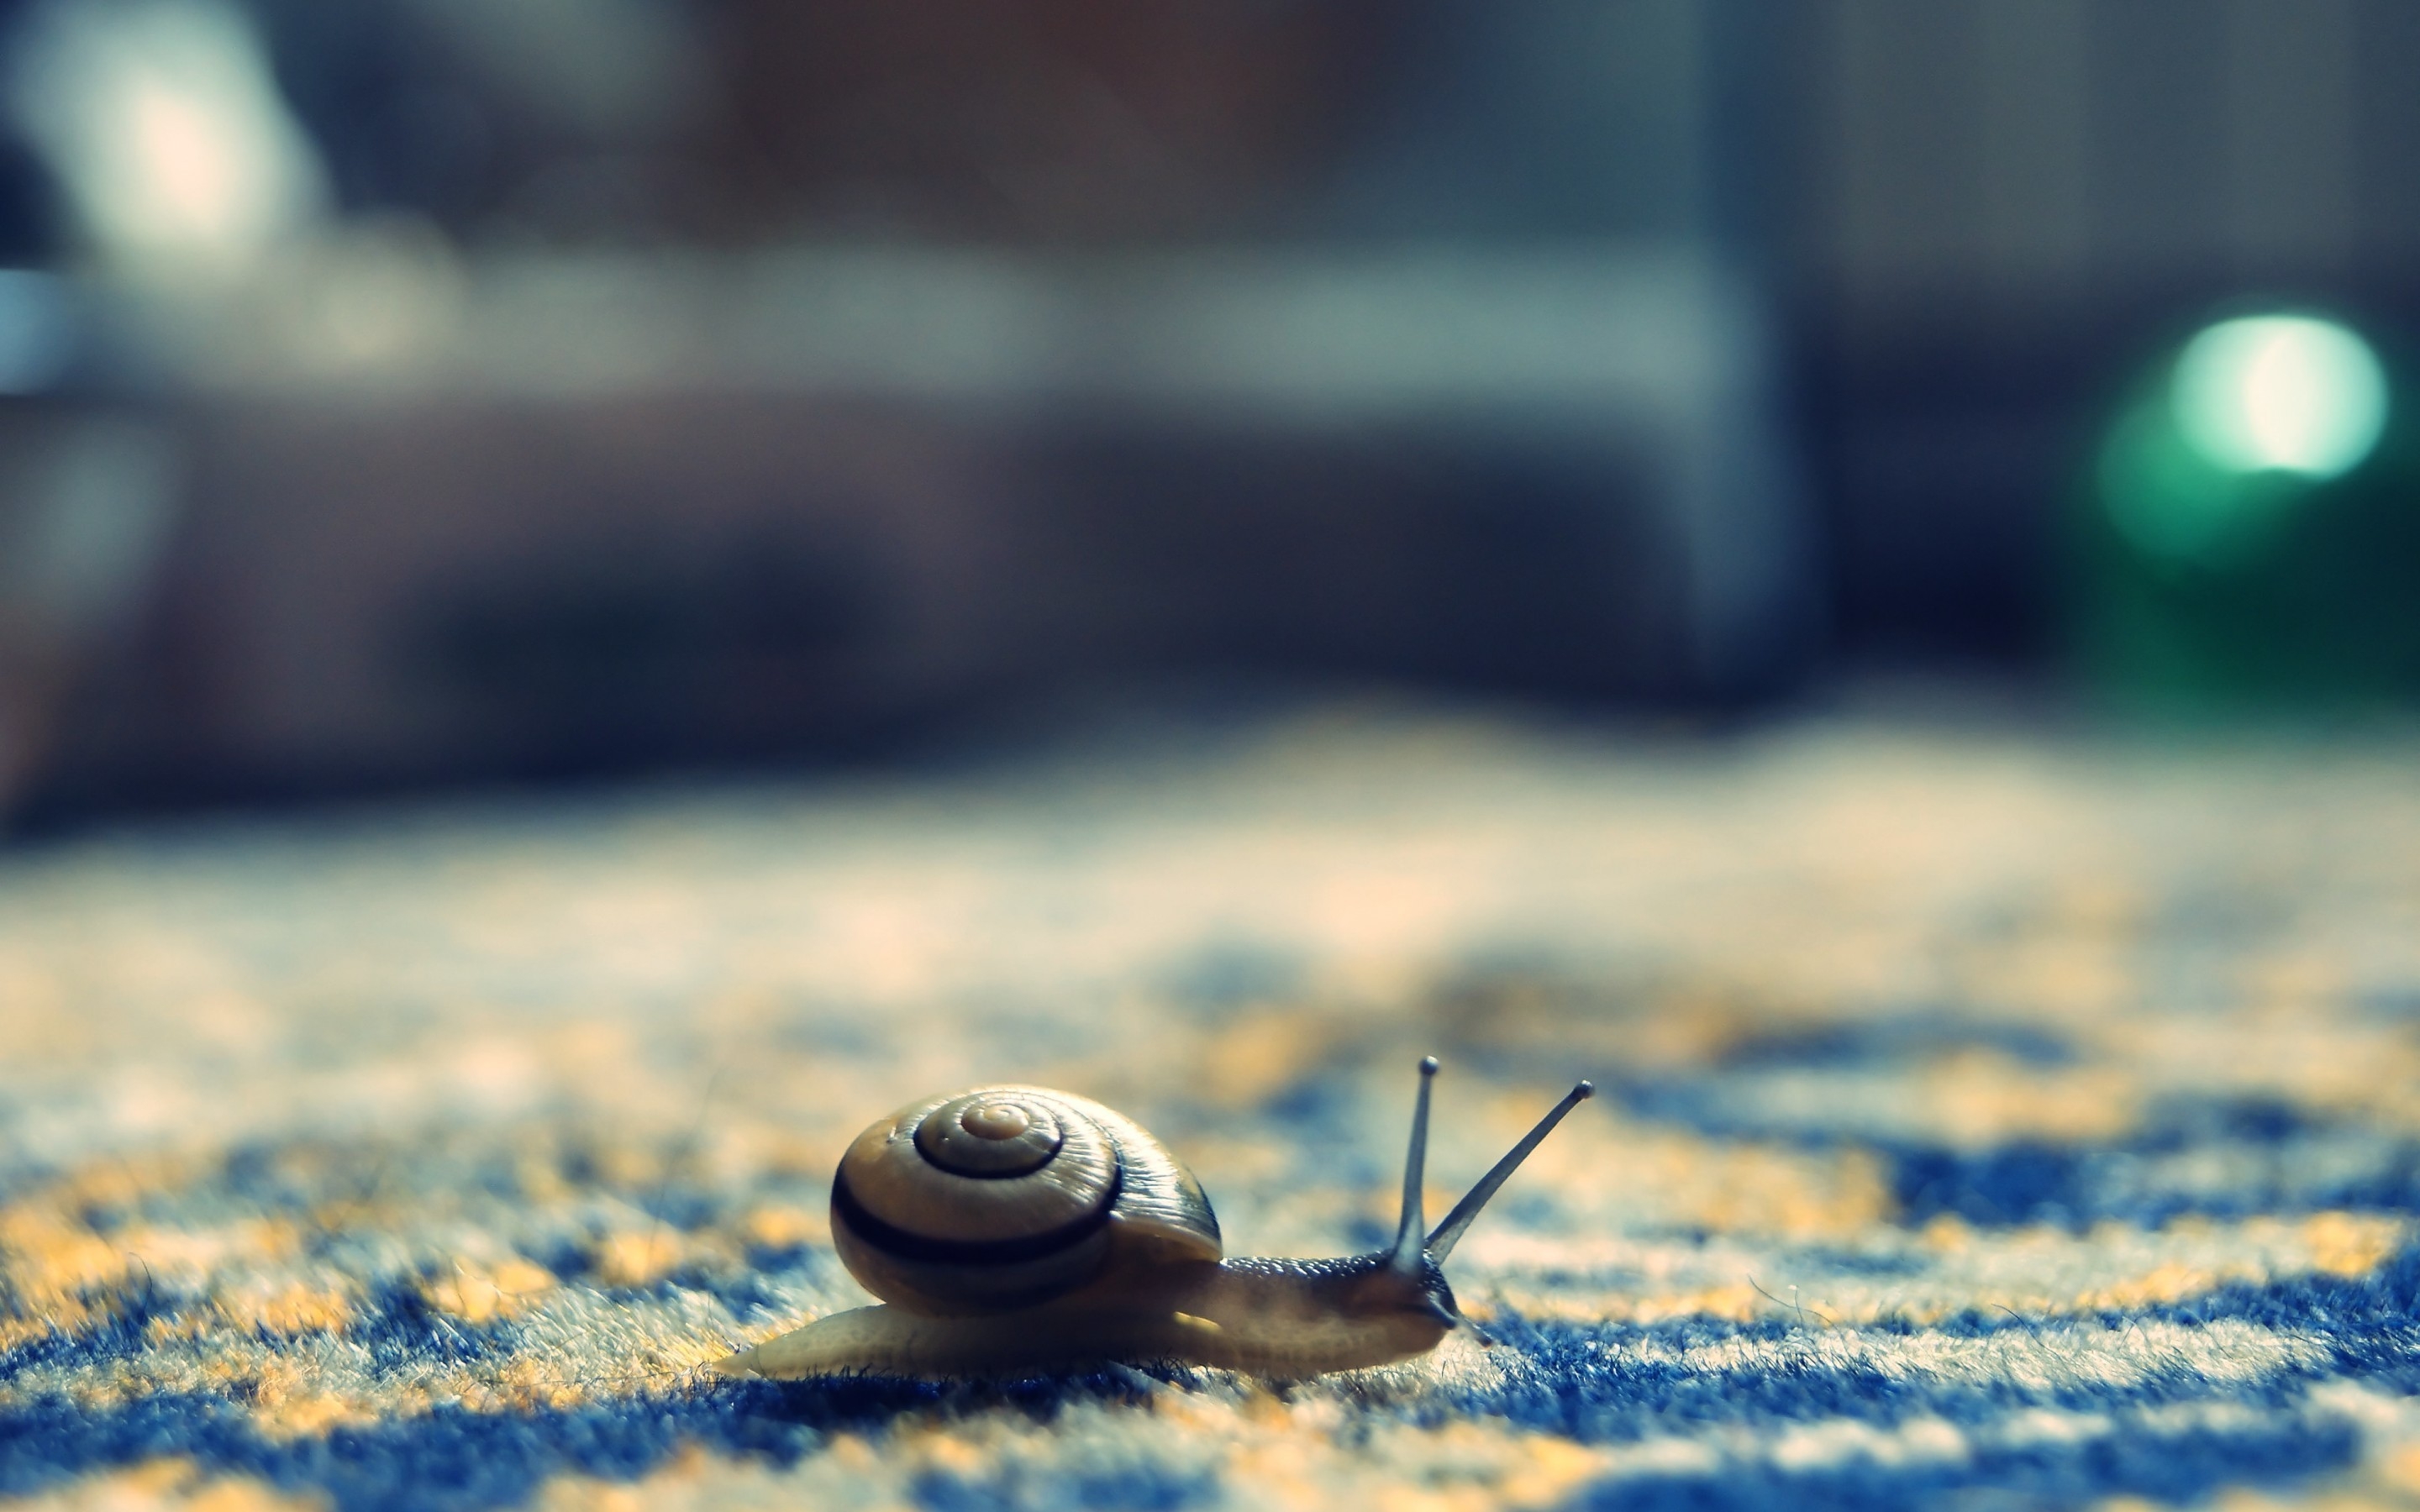 Little Snail for 2880 x 1800 Retina Display resolution